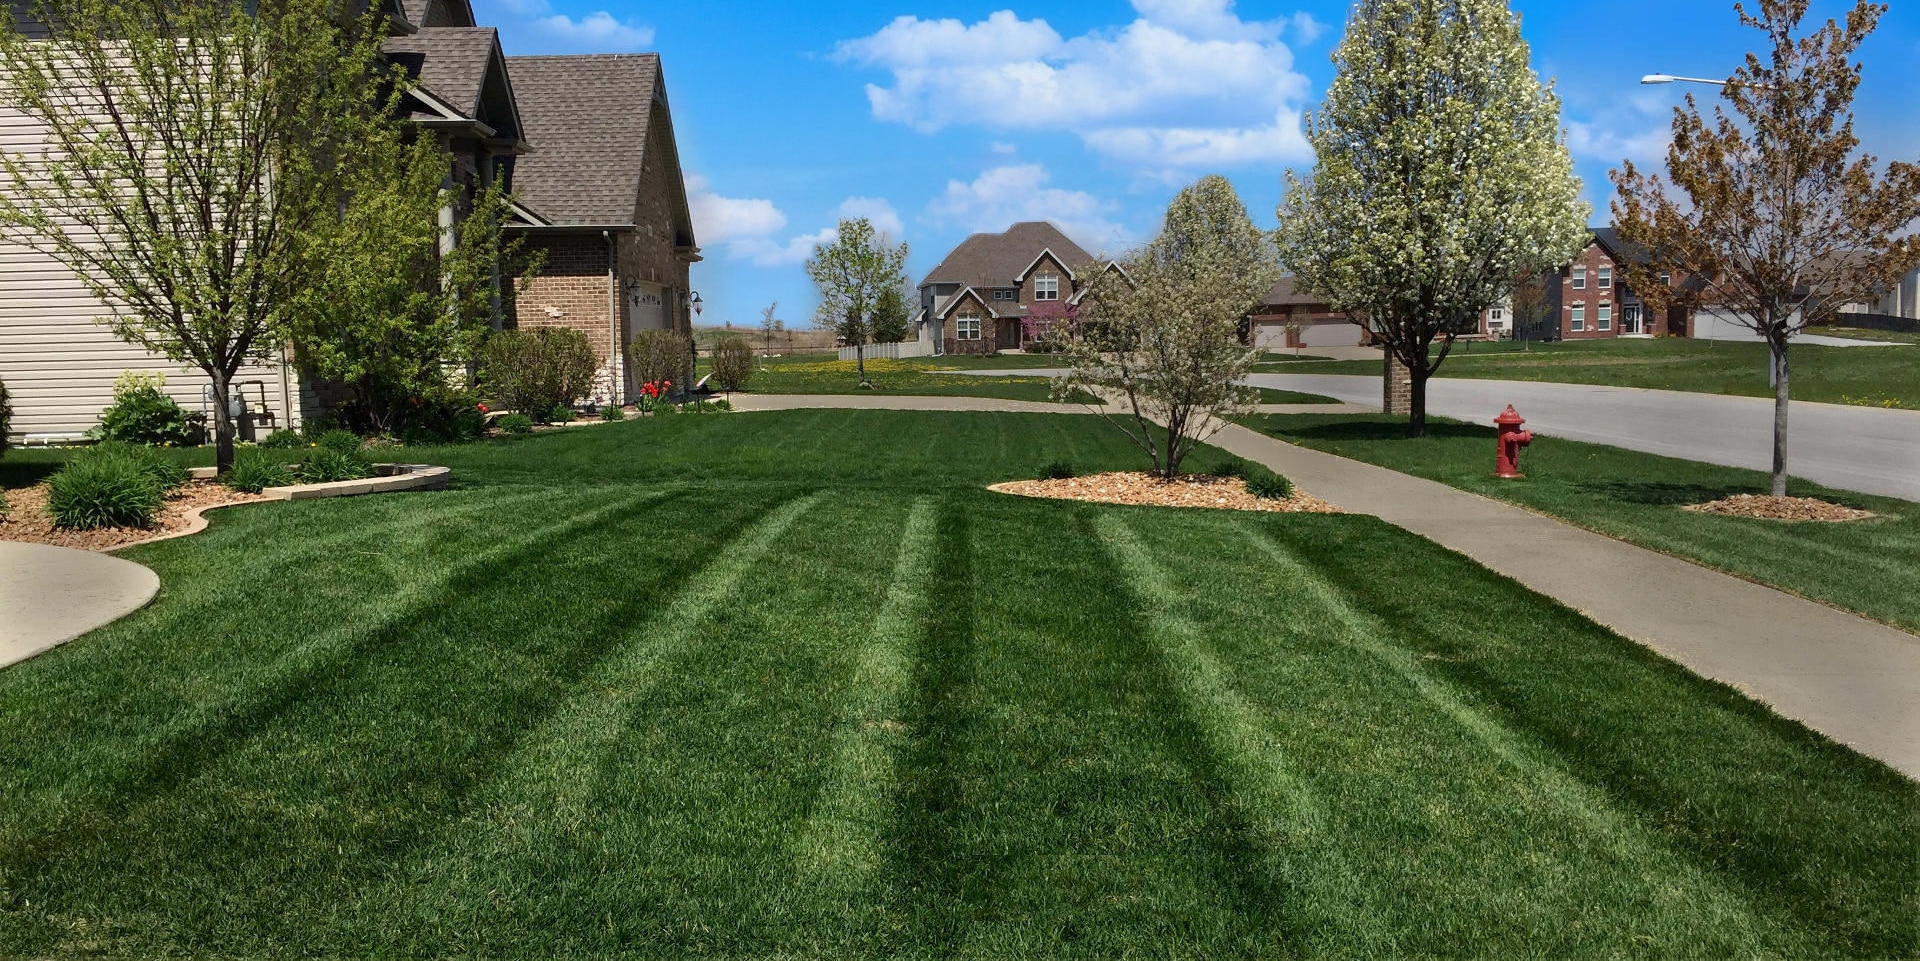 Omaha Lawn Care News Ecoscapes, Landscaping Omaha Ne